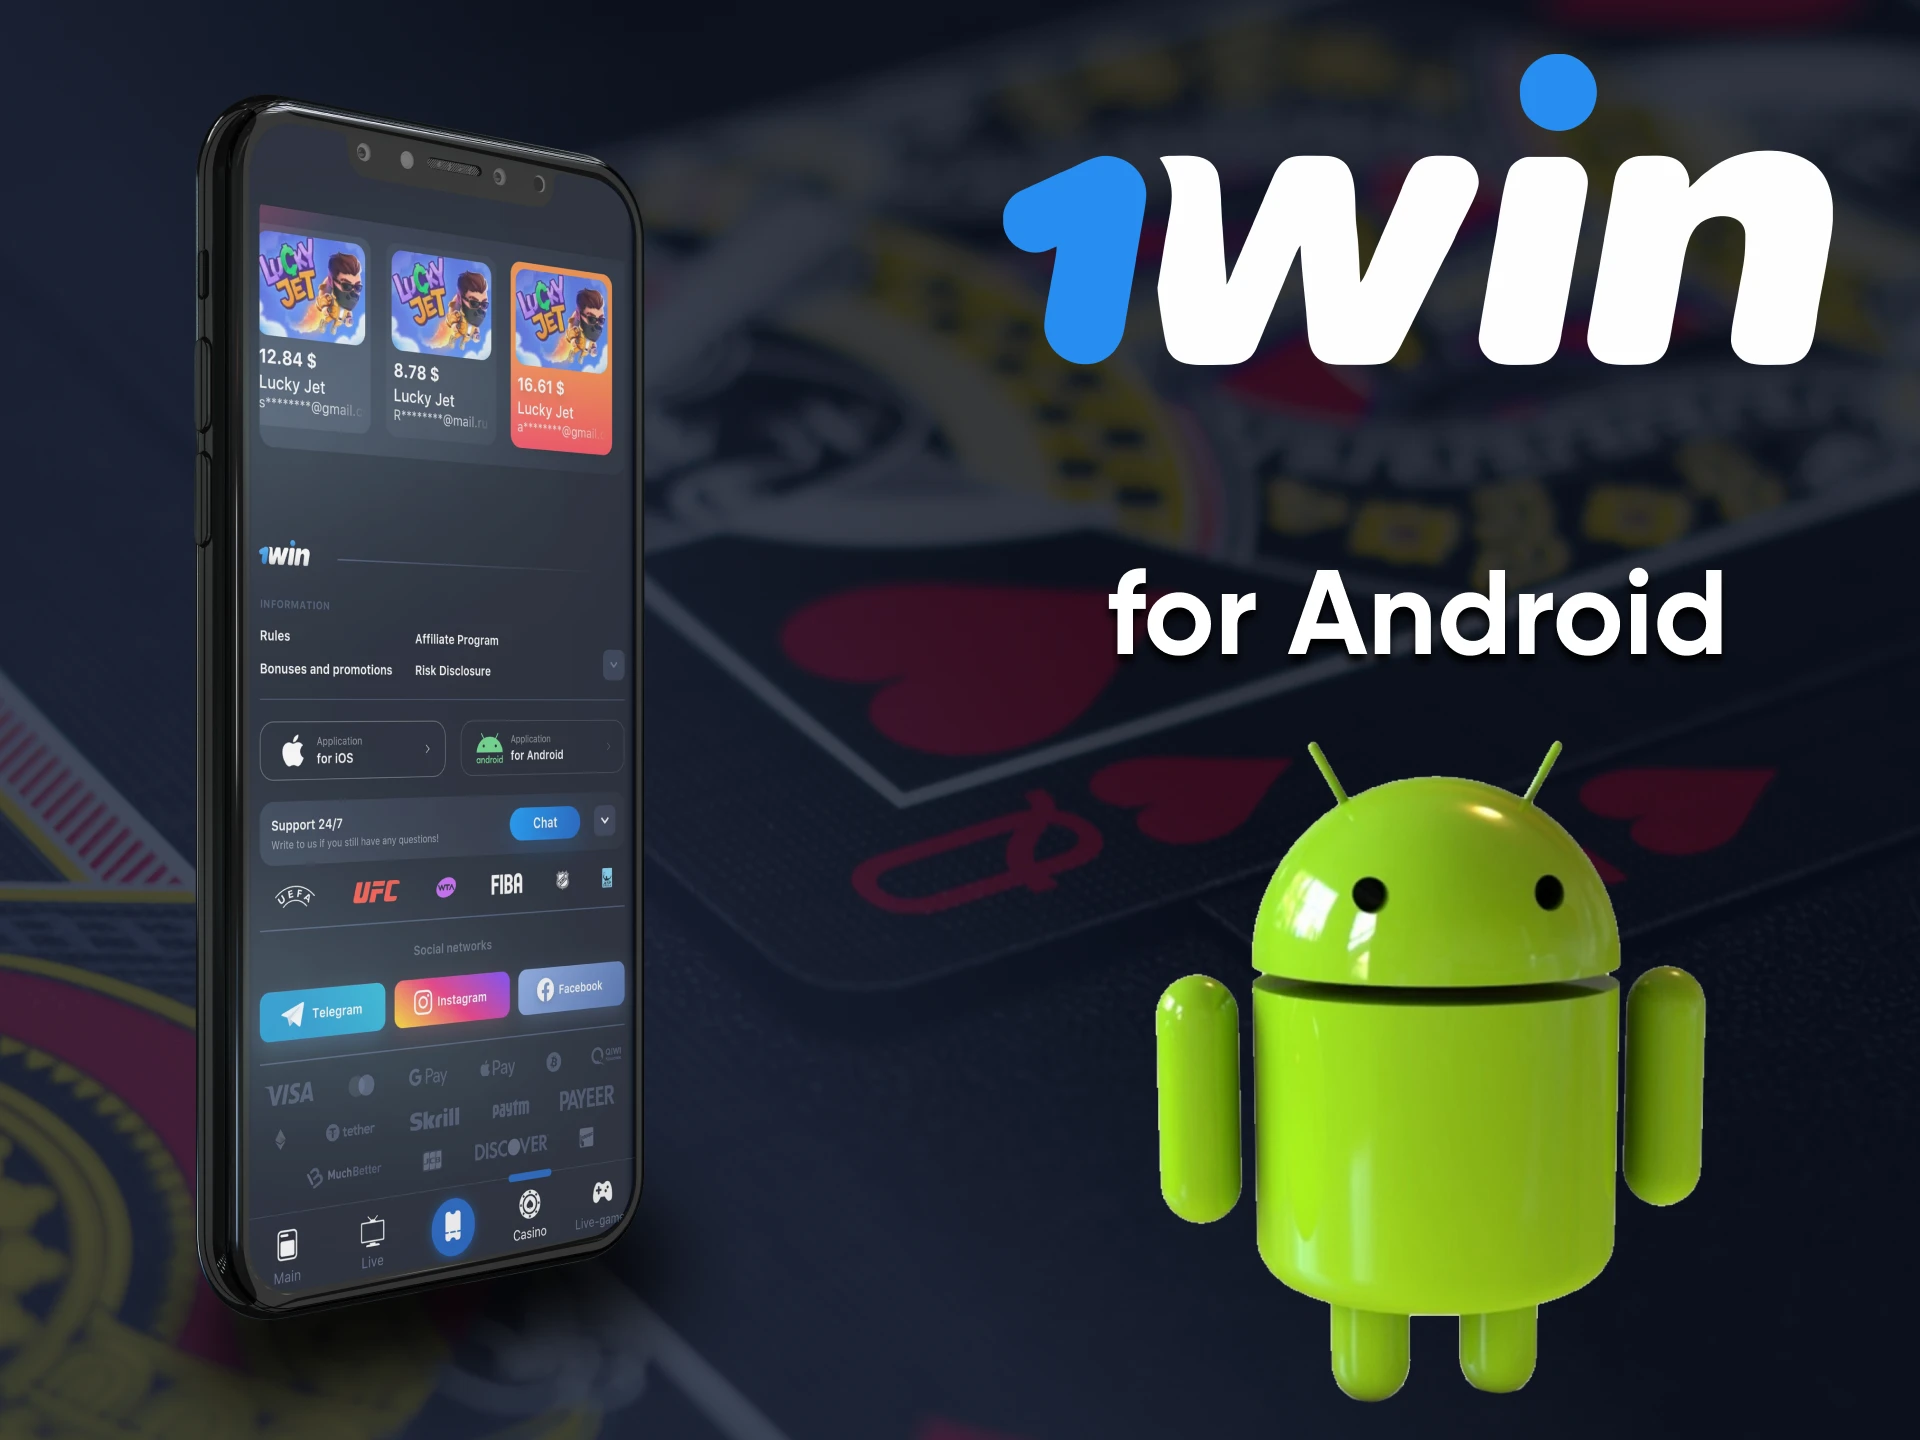 Use casino from 1win on android smartphones.